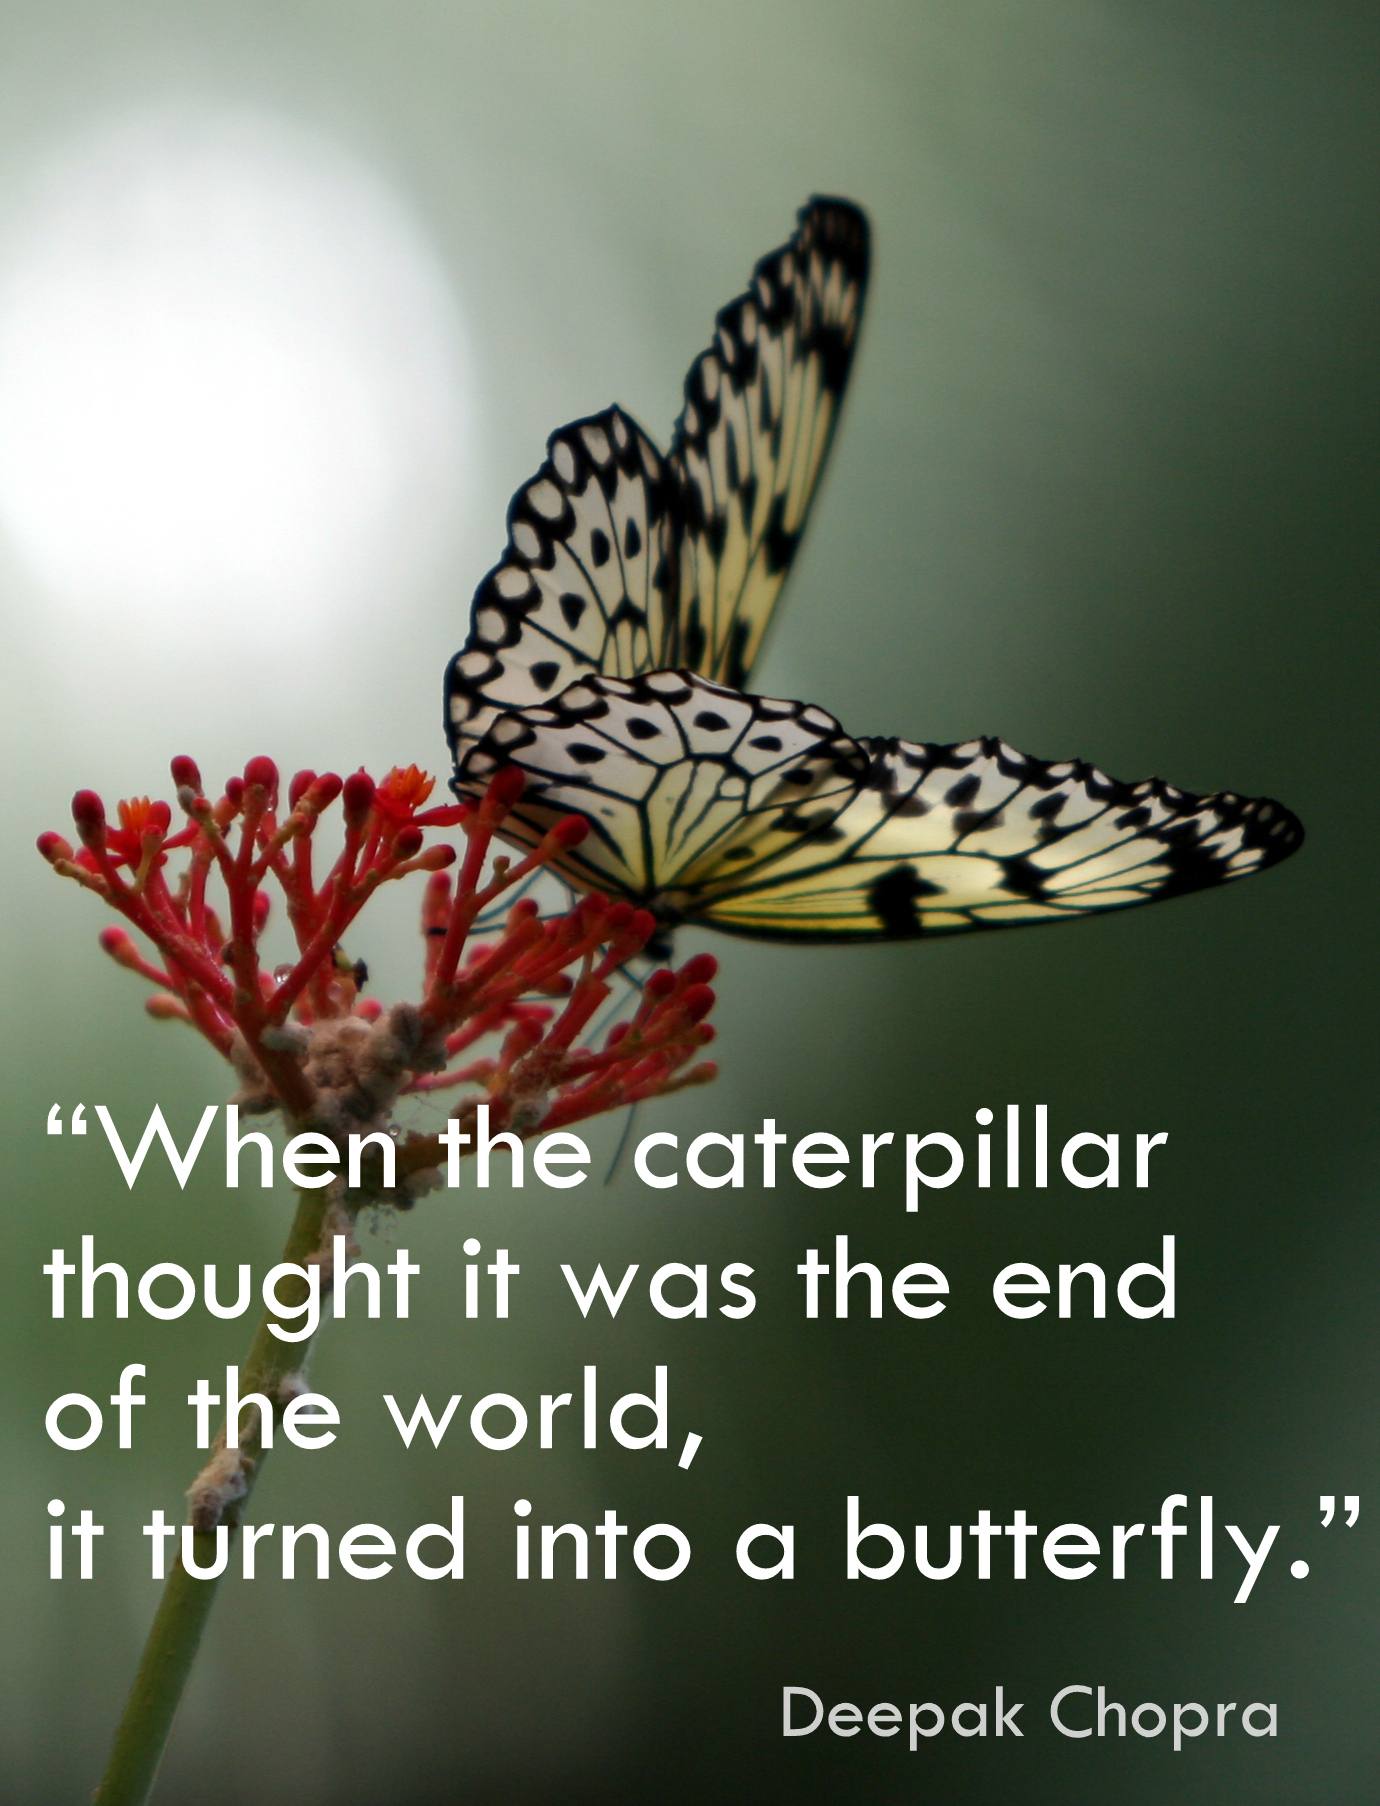 Butterfly Metamorphosis Quotes. QuotesGram